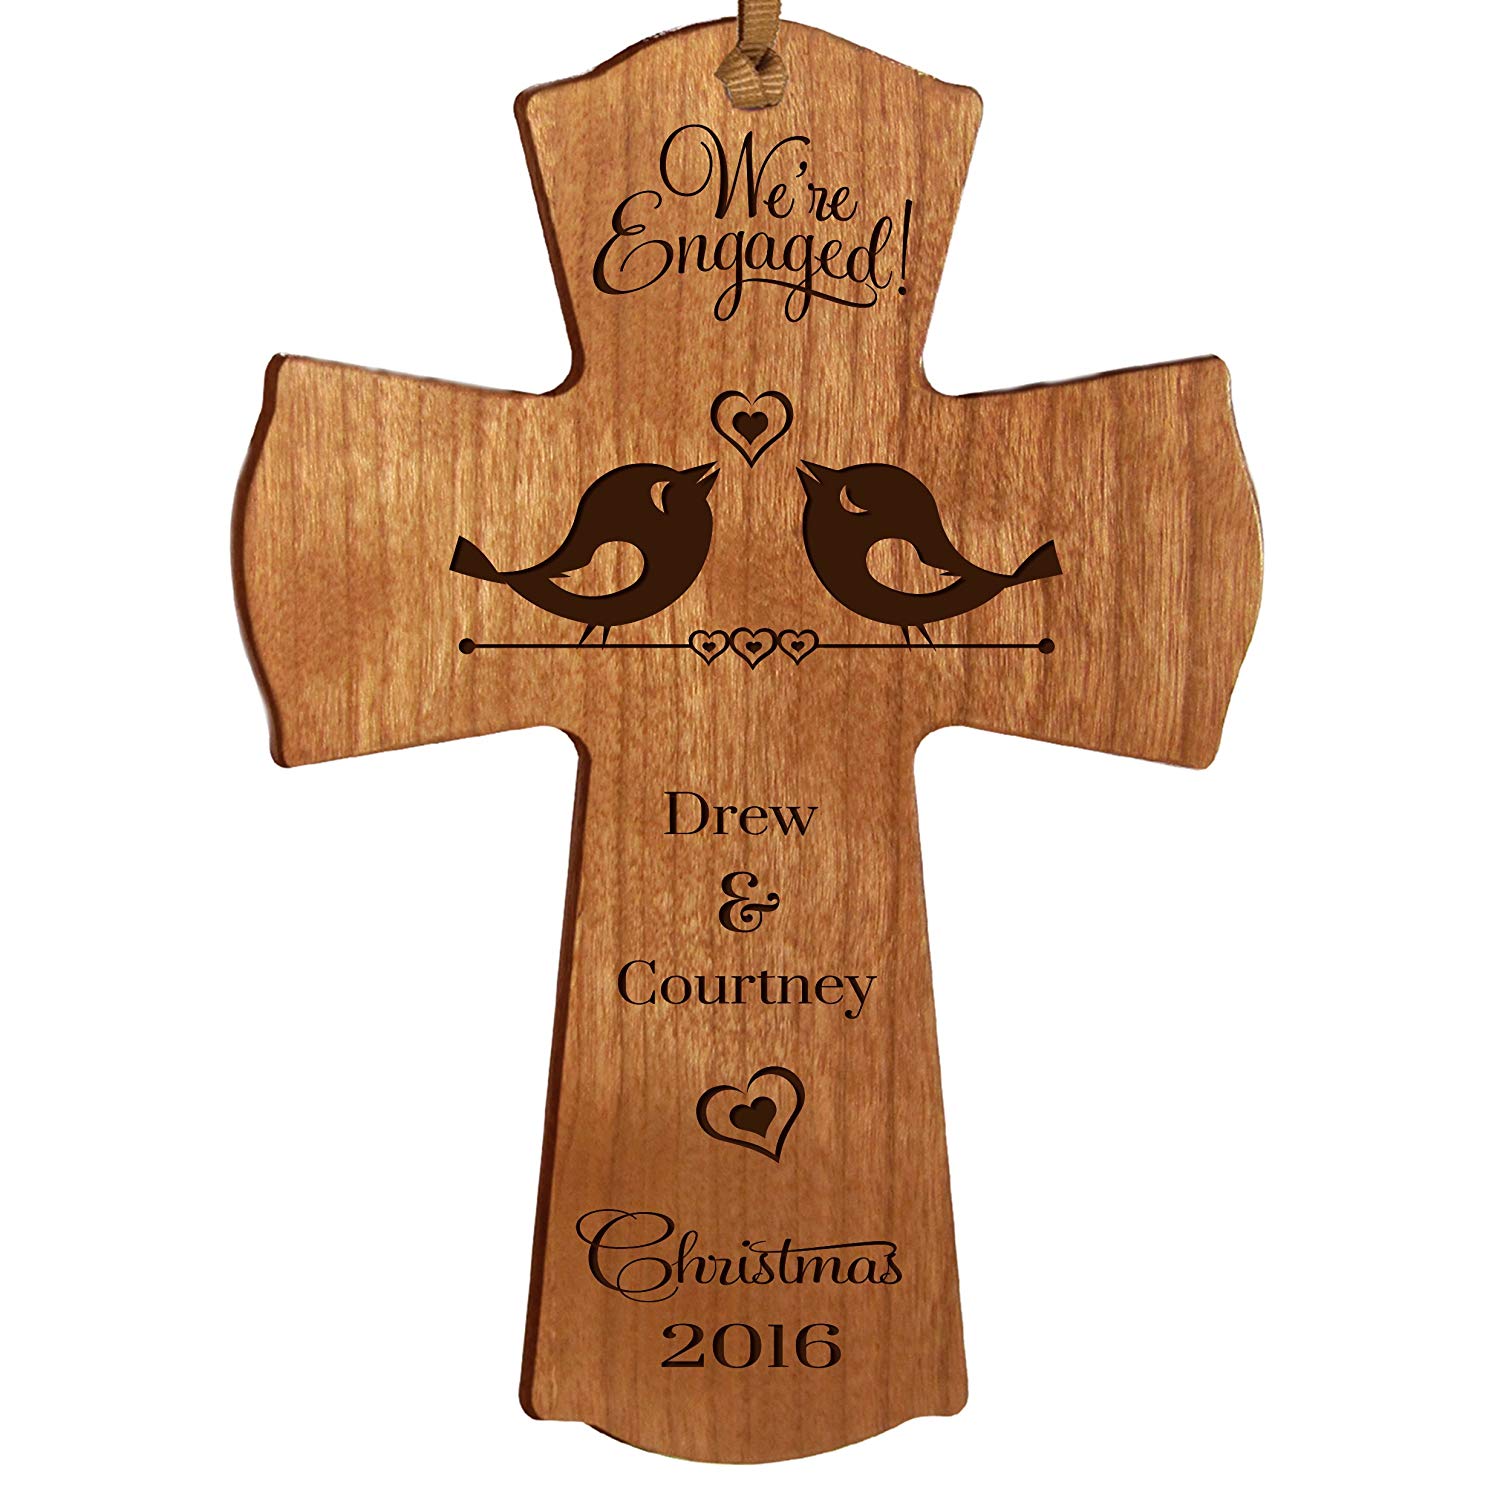 Personalized Christmas Engaged Wall Cross - LifeSong Milestones